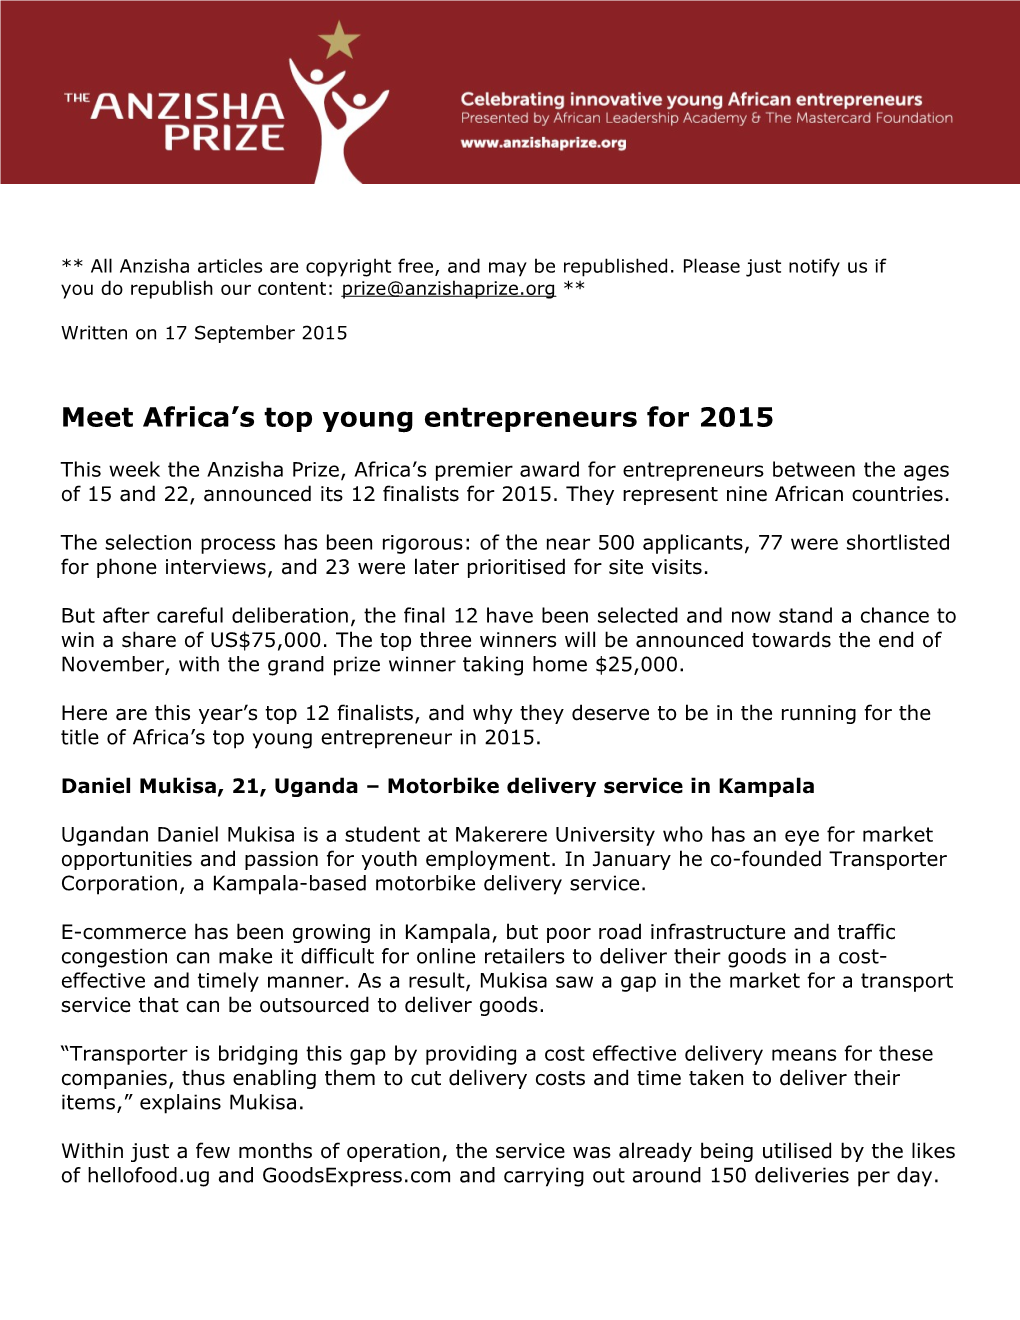 Meet Africa S Top Young Entrepreneurs for 2015